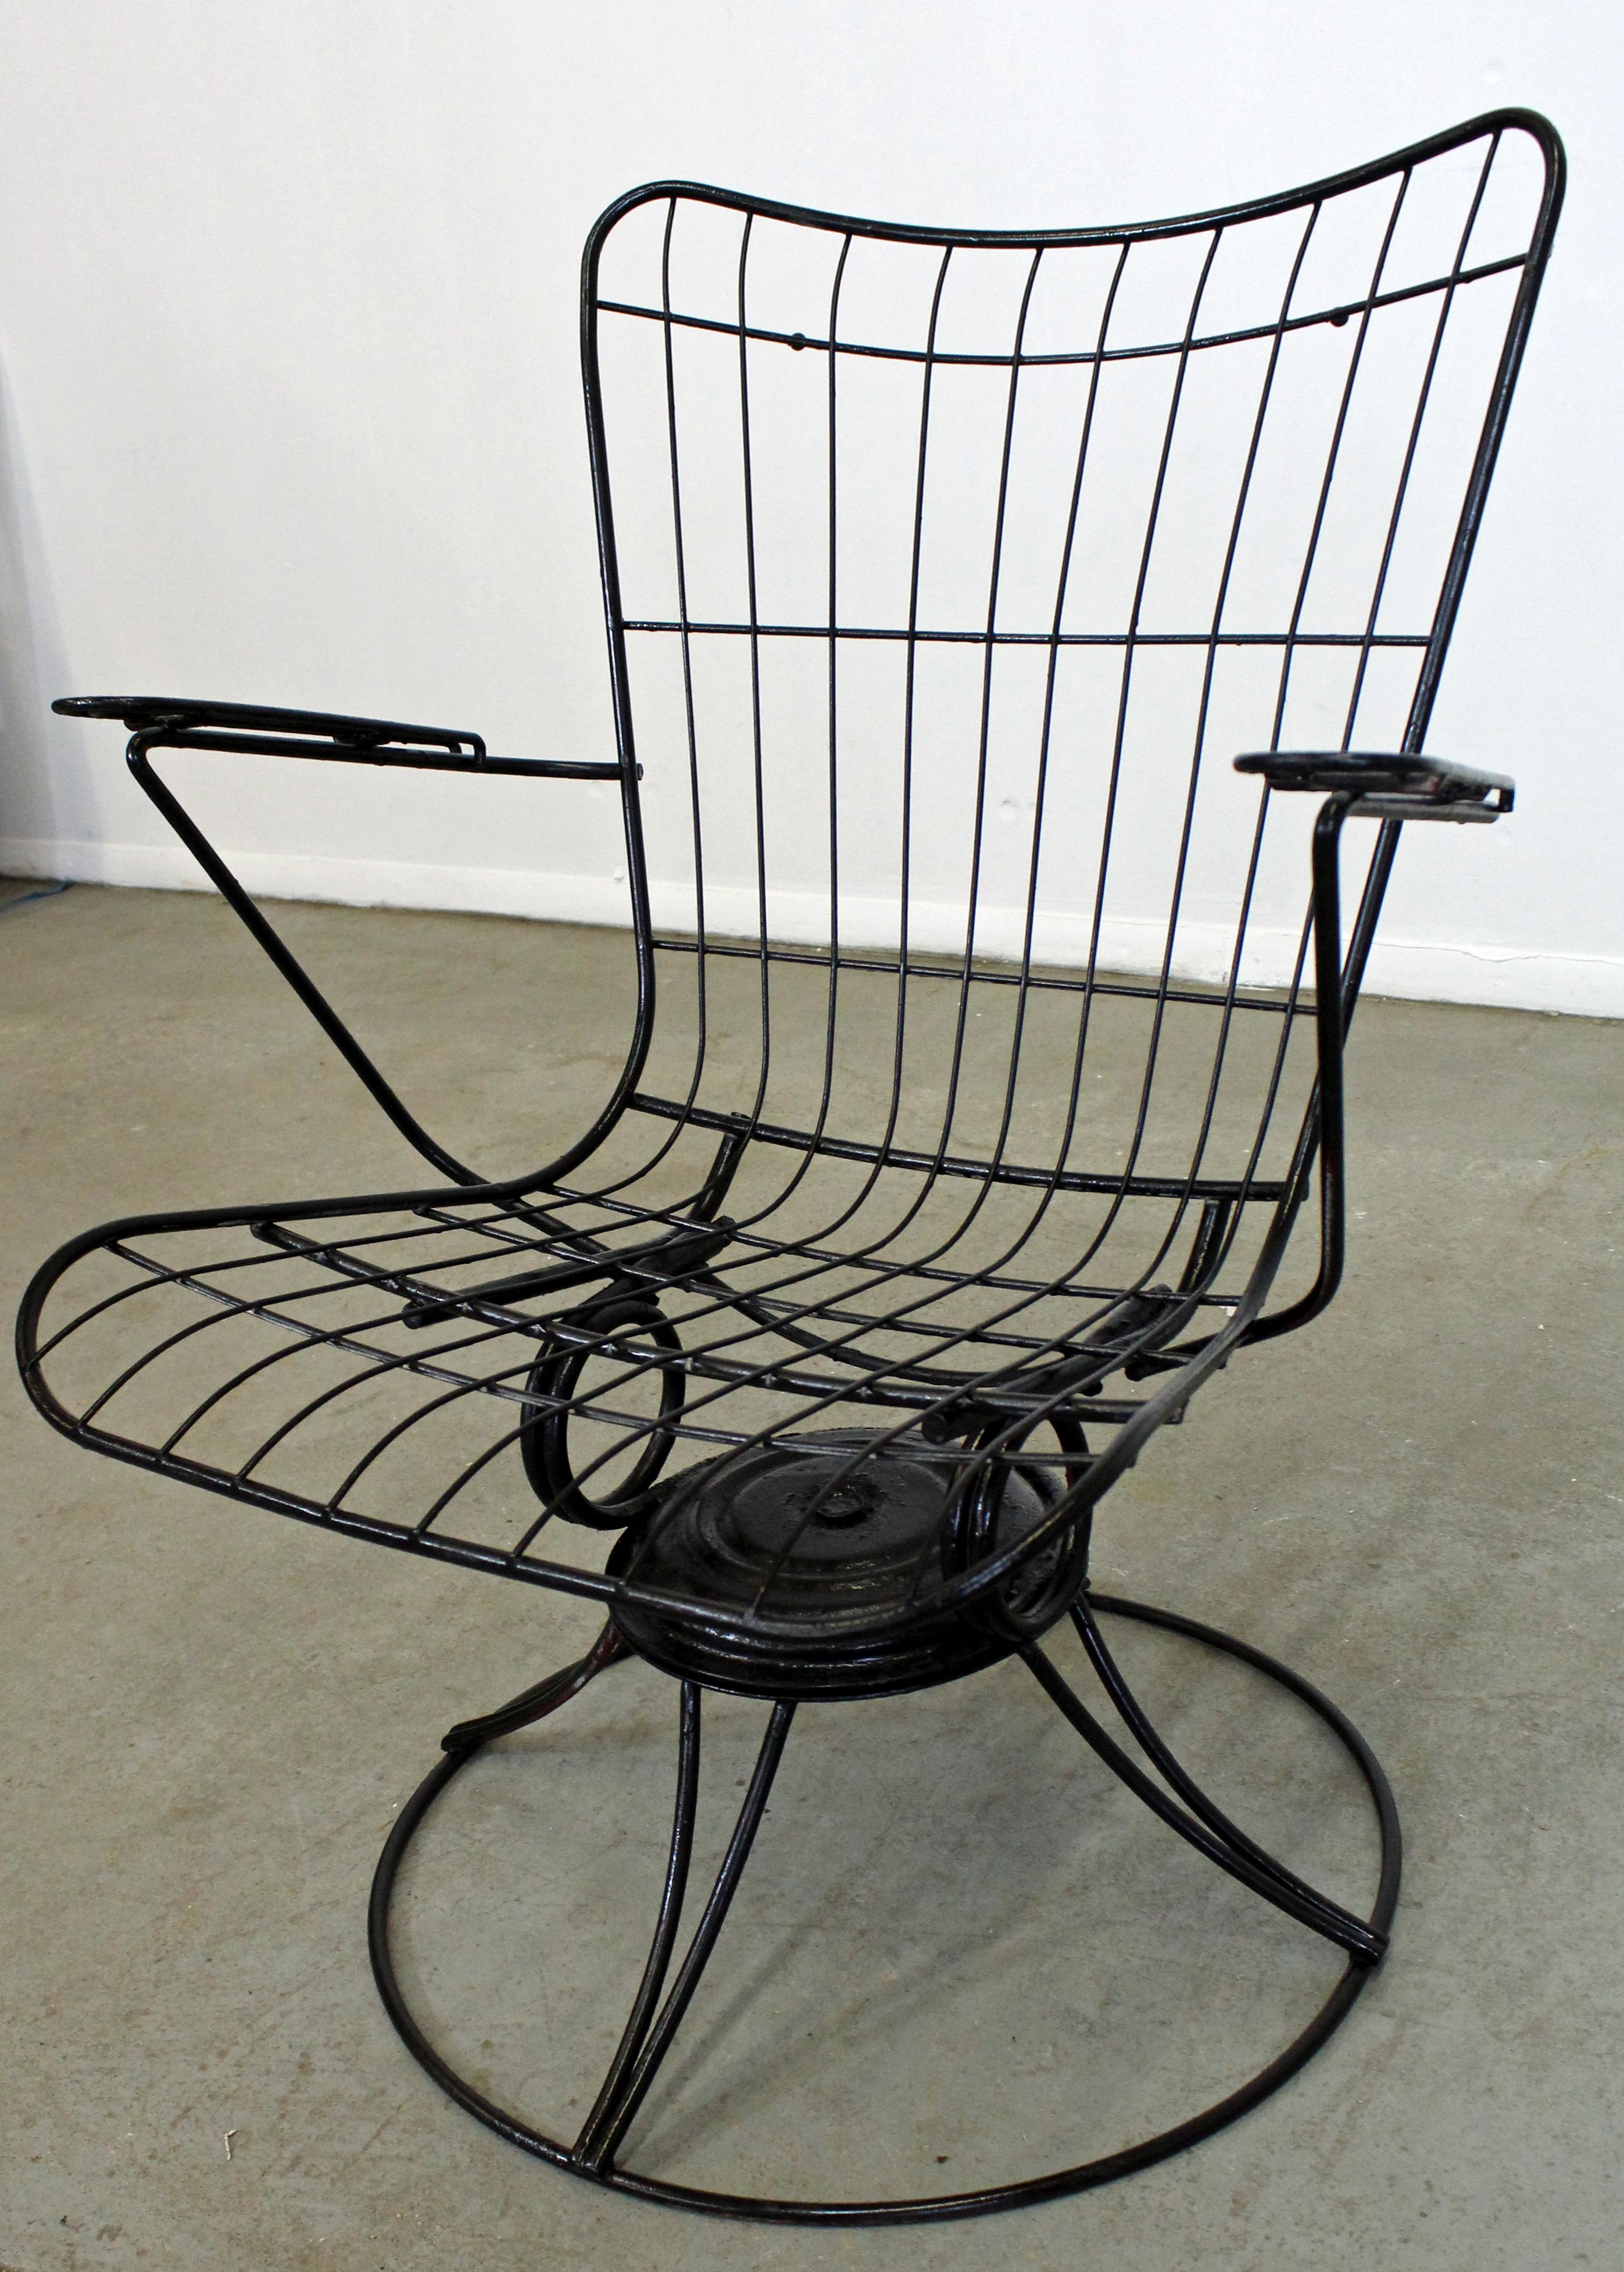 What a find. Offered is Mid-Century Modern outdoor lounge chair made by Homecrest. It is made of iron and it swivels and tilts. It is in excellent condition, has been painted black. It is not signed!

Dimensions:
26.5